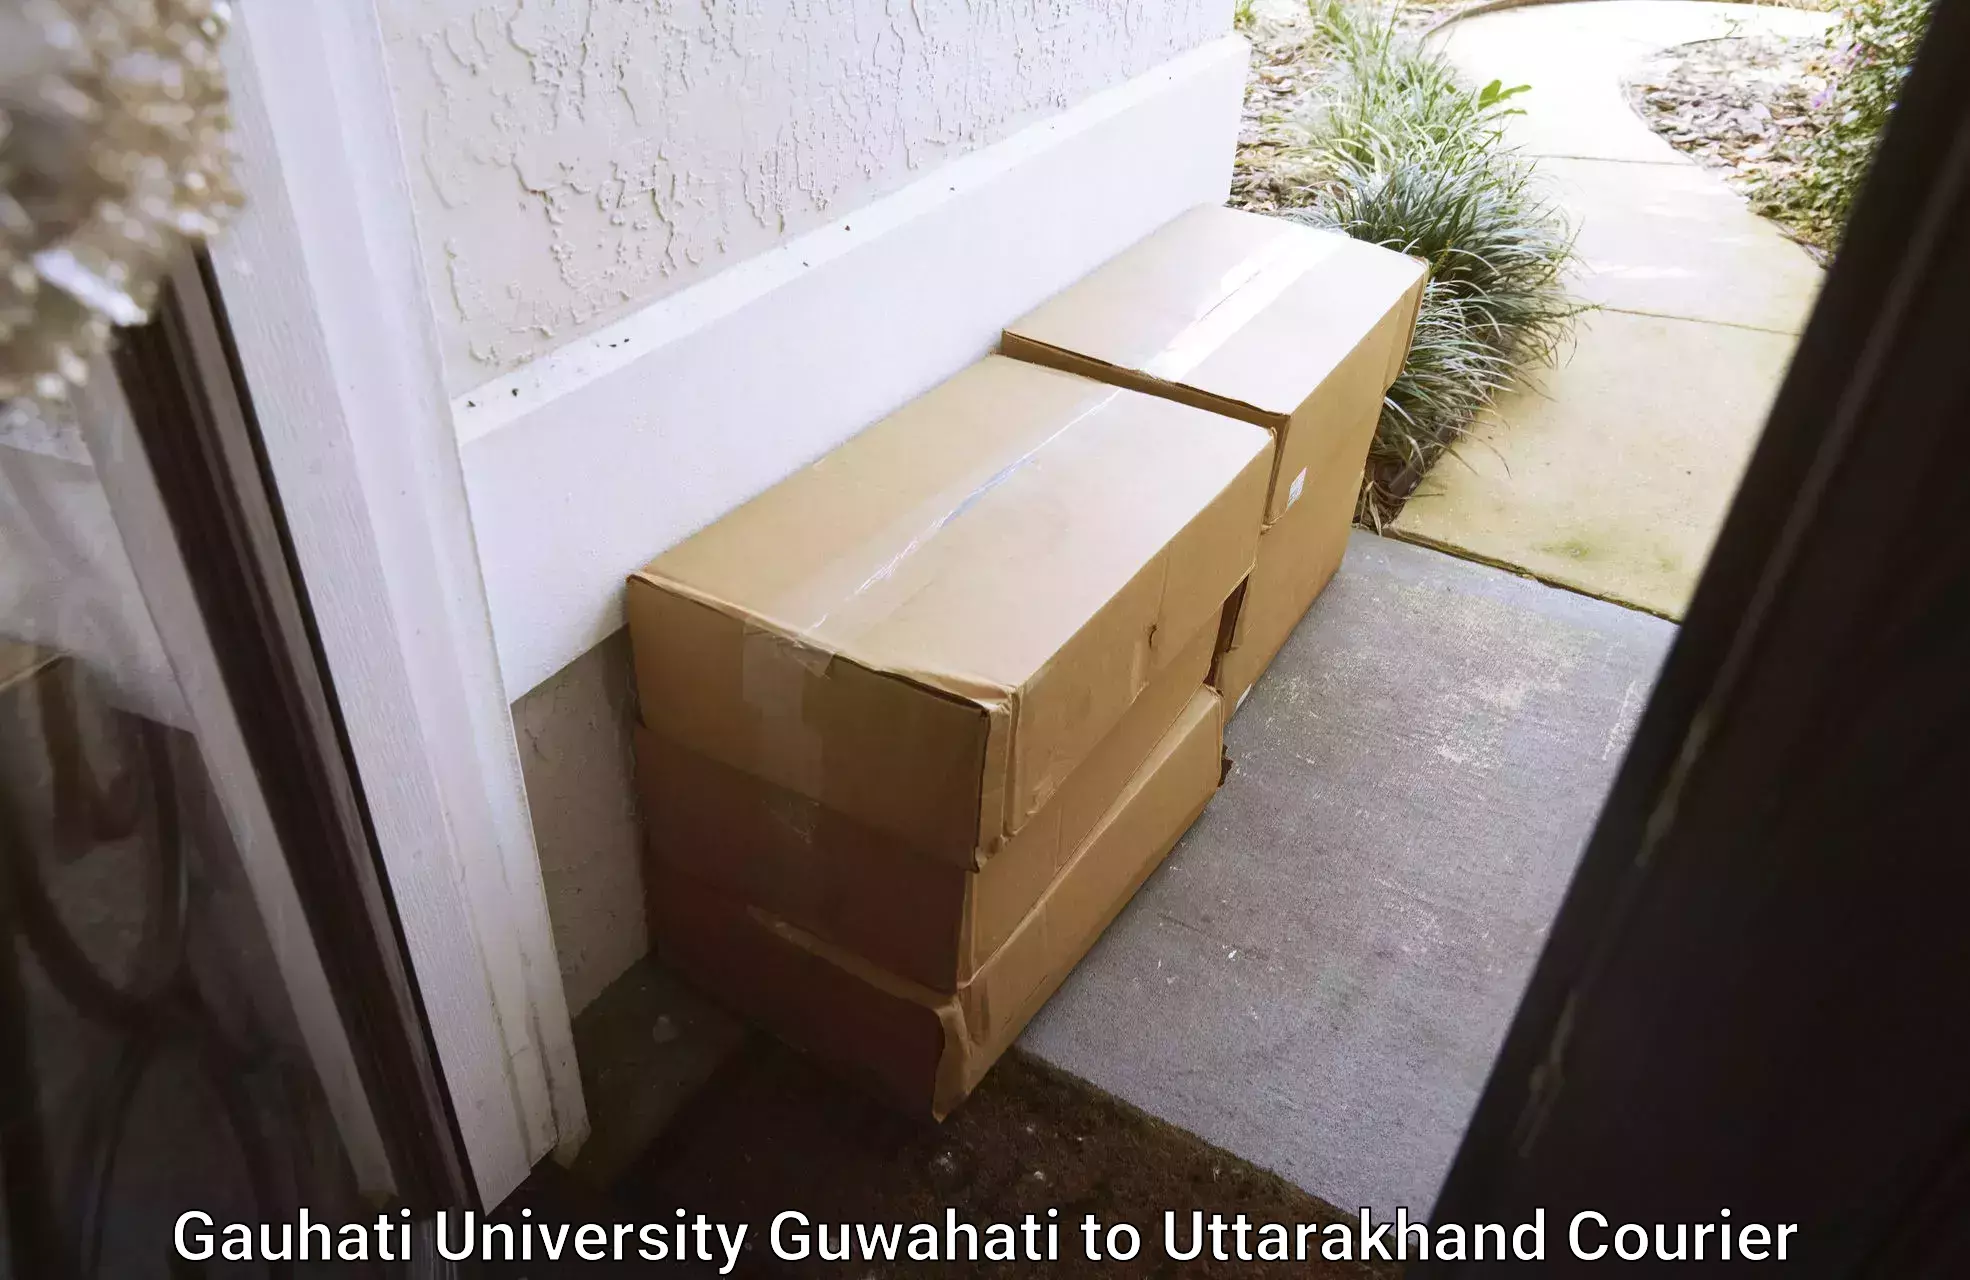 Specialized courier services in Gauhati University Guwahati to Almora